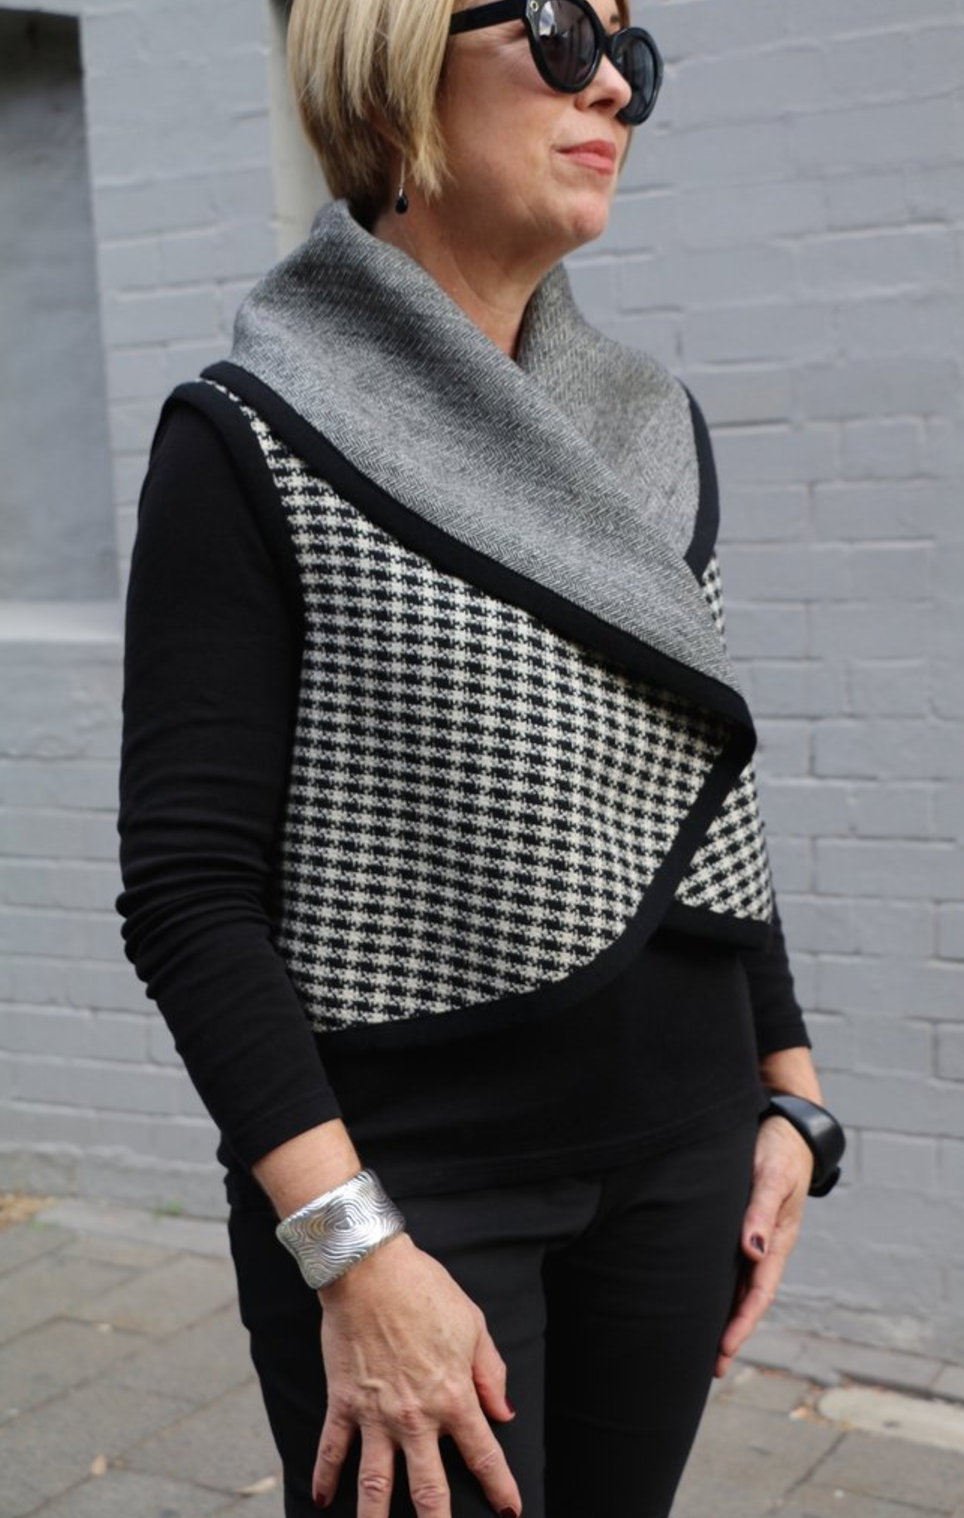 Buy the Kyoto Vest sewing pattern from Tessuti Fabrics on The Fold Line.